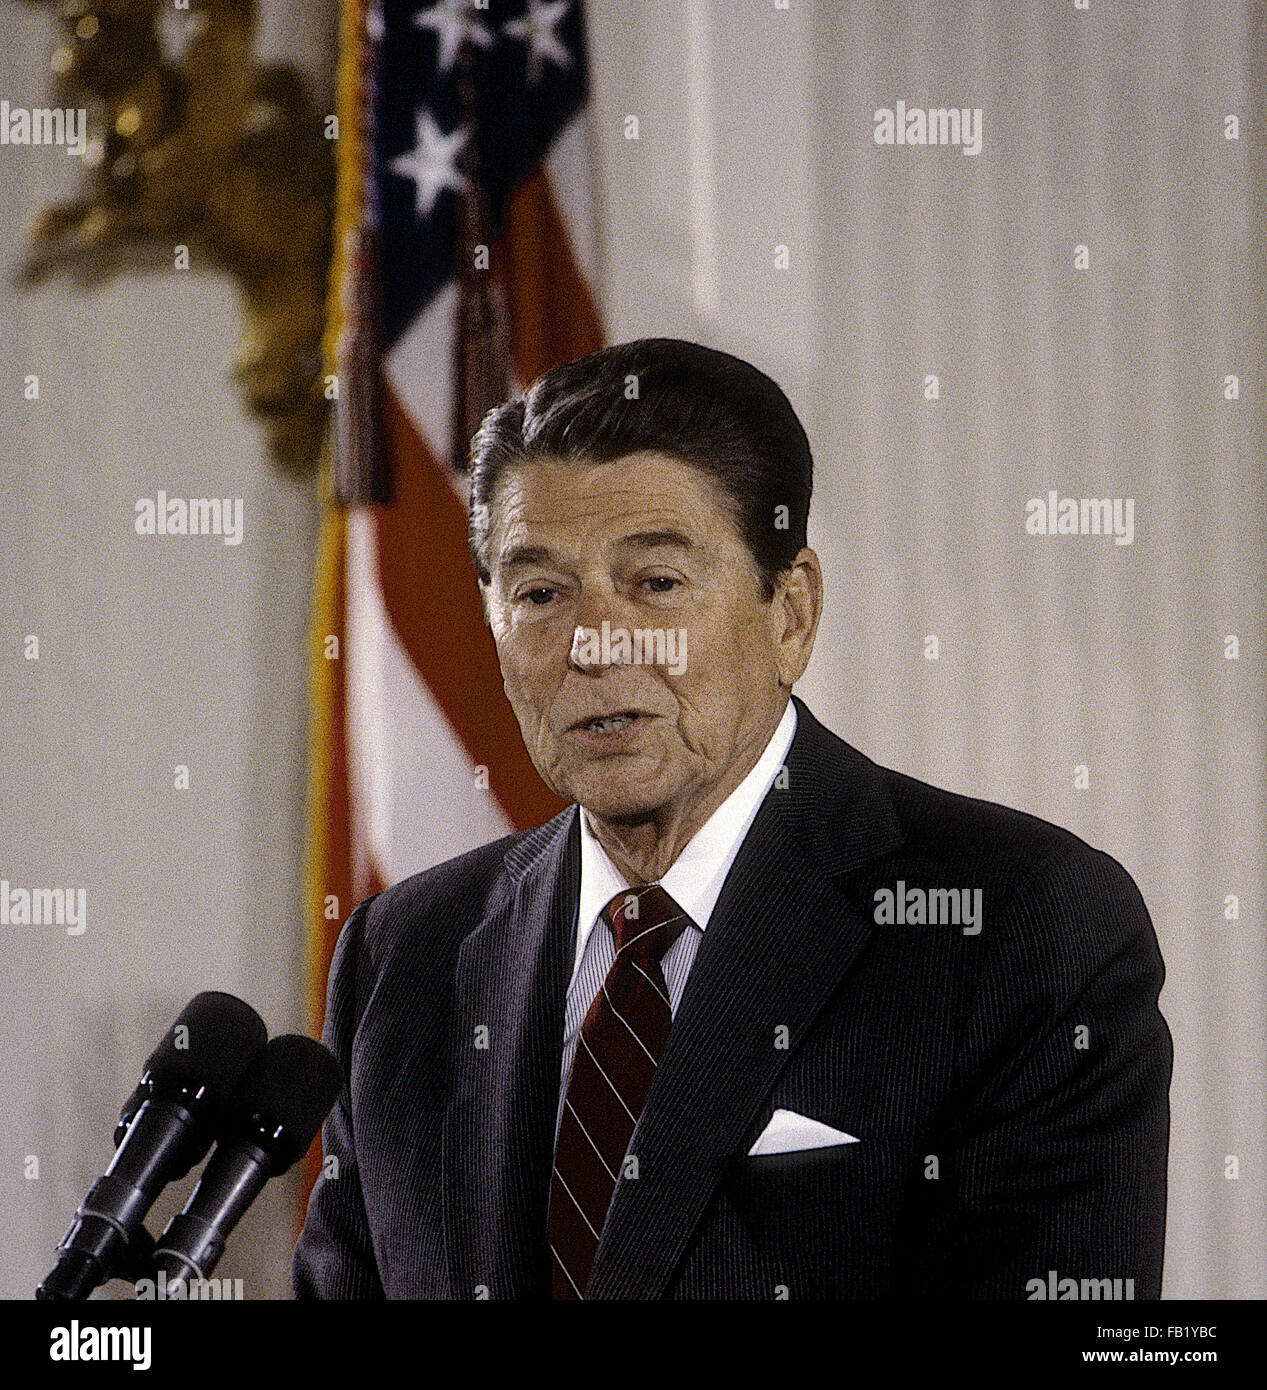 Washington, DC., USA, 25th June, 1985 President Ronald Reagan talks about the space shuttle program in the East Room of the White House. This was for the final selection for a teacher to go in space on the shuttle. Christa McAuliffe was picked as the teacher to go into space. She died when the shuttle Challenger exploded in 1986.  Credit: Mark Reinstein Stock Photo